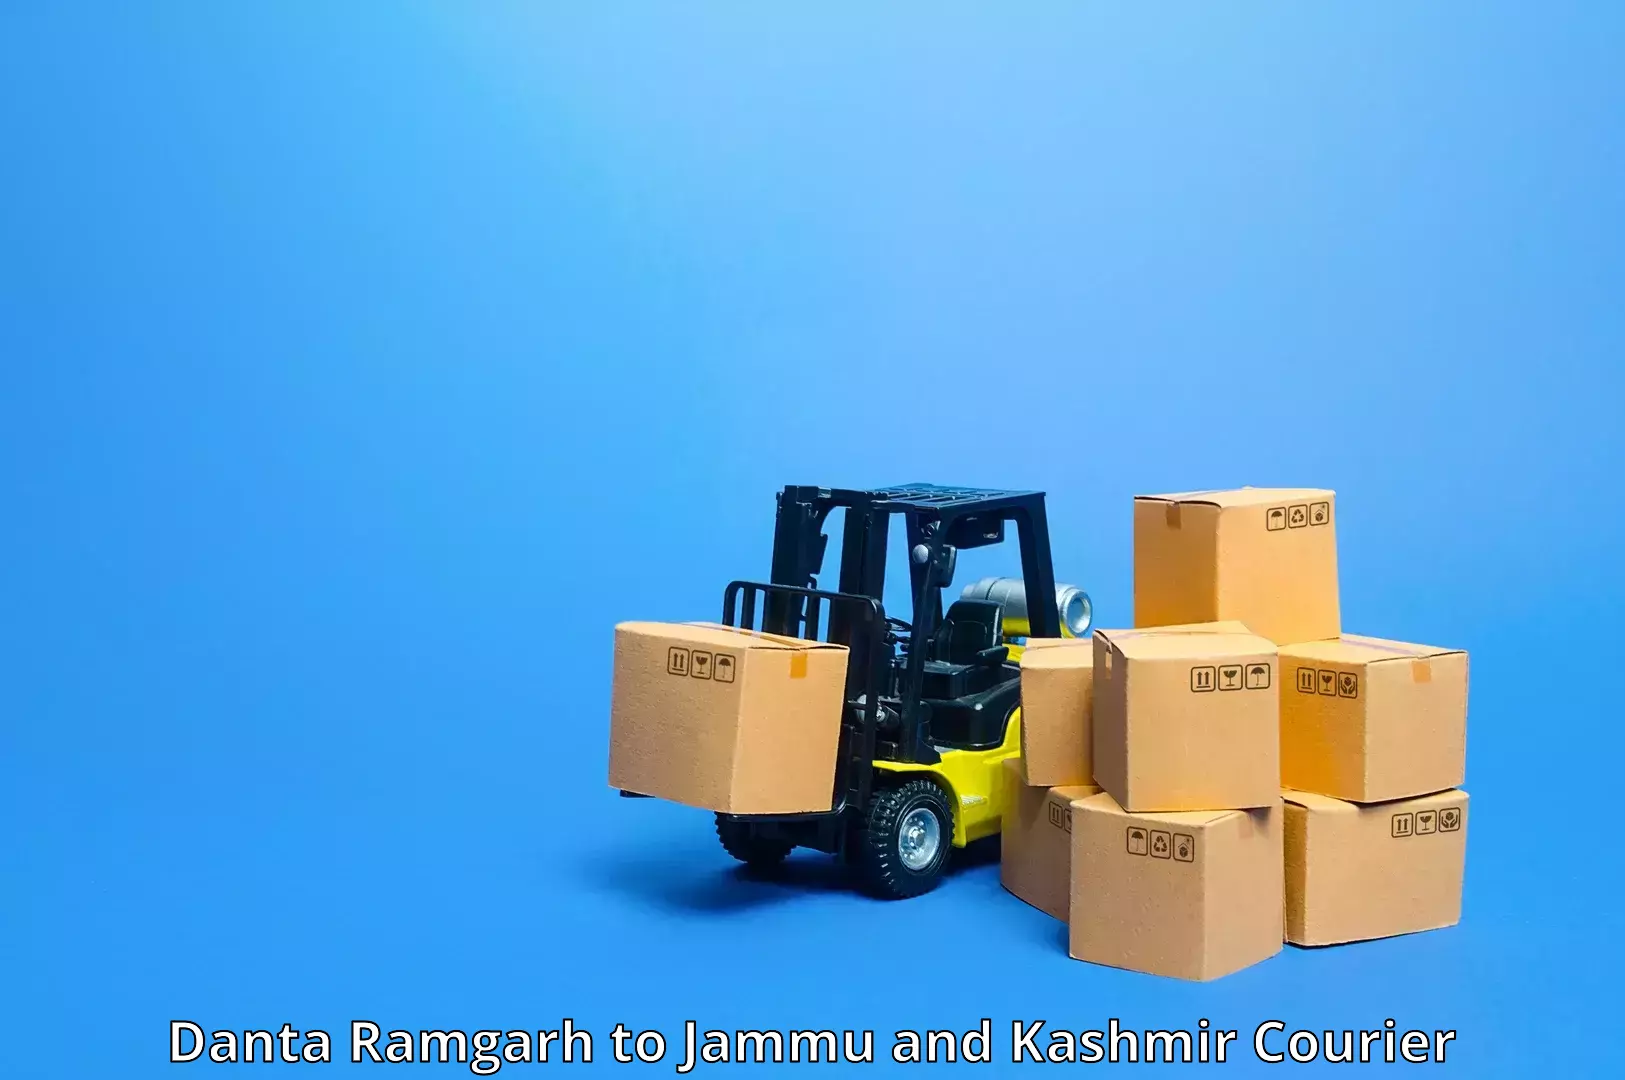 Nationwide parcel services Danta Ramgarh to Shopian